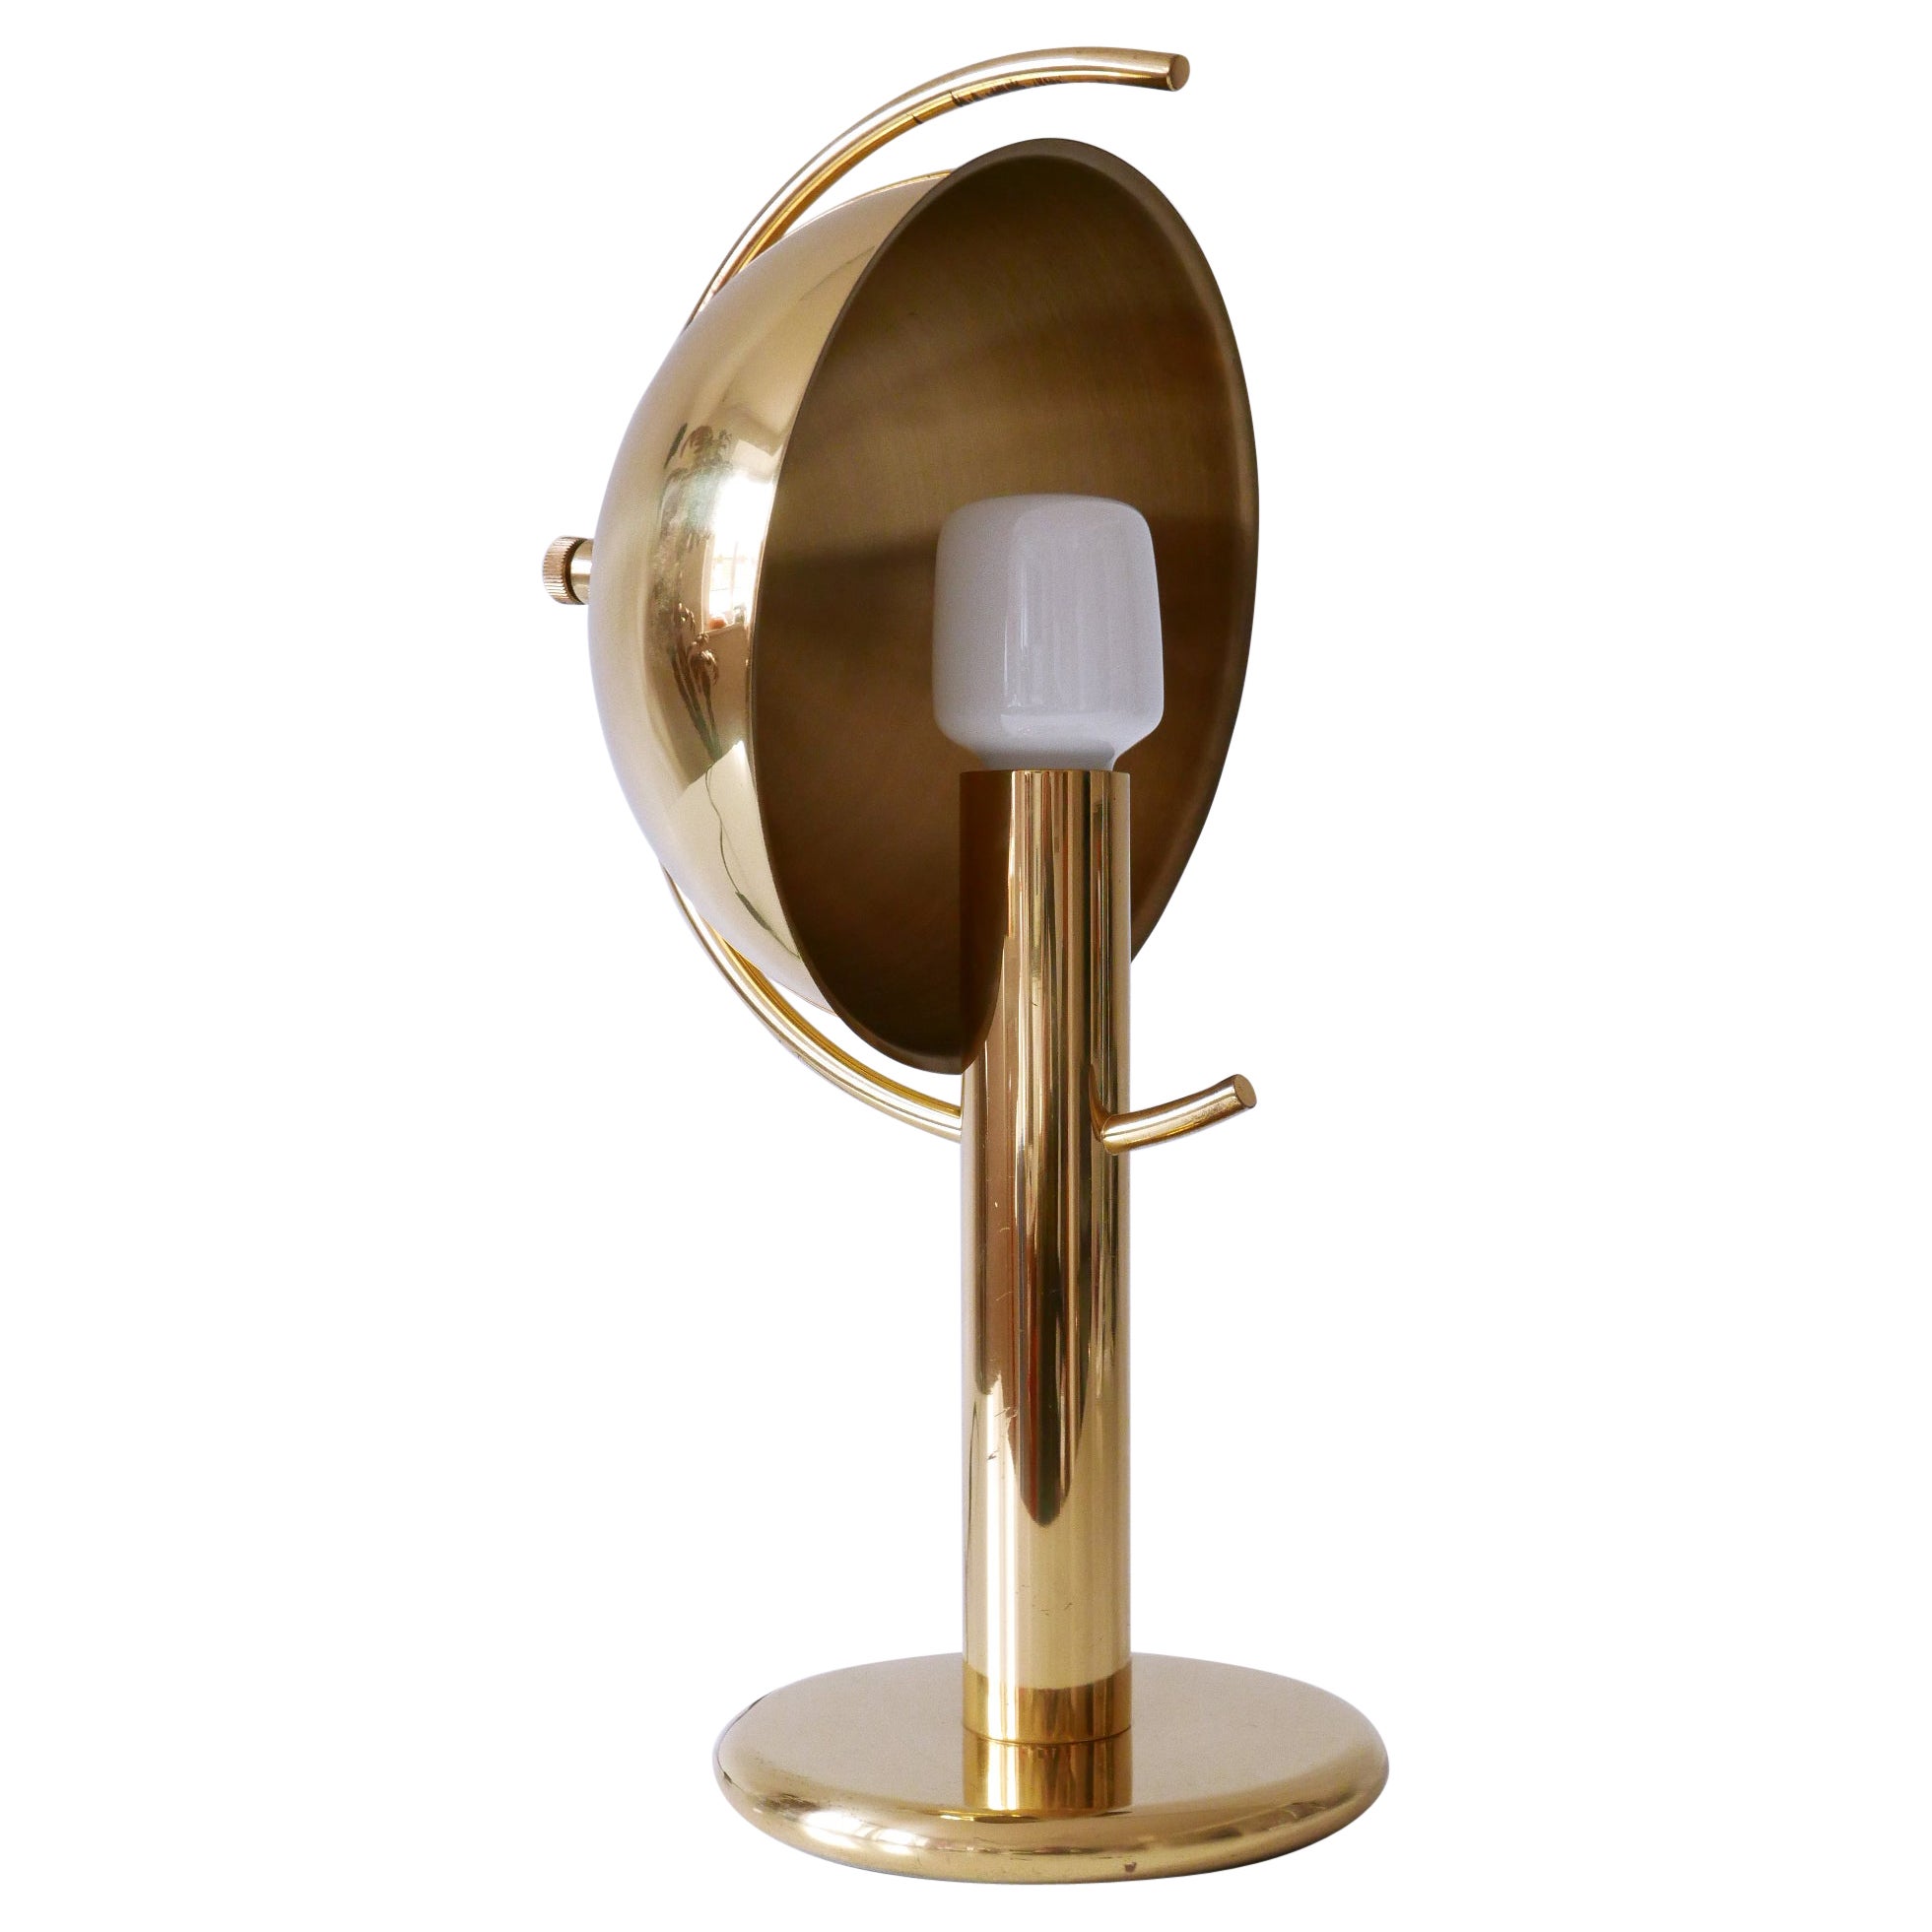 Exceptional Mid-Century Modern Brass Table Lamp by Gebrüder Cosack Germany 1960s For Sale